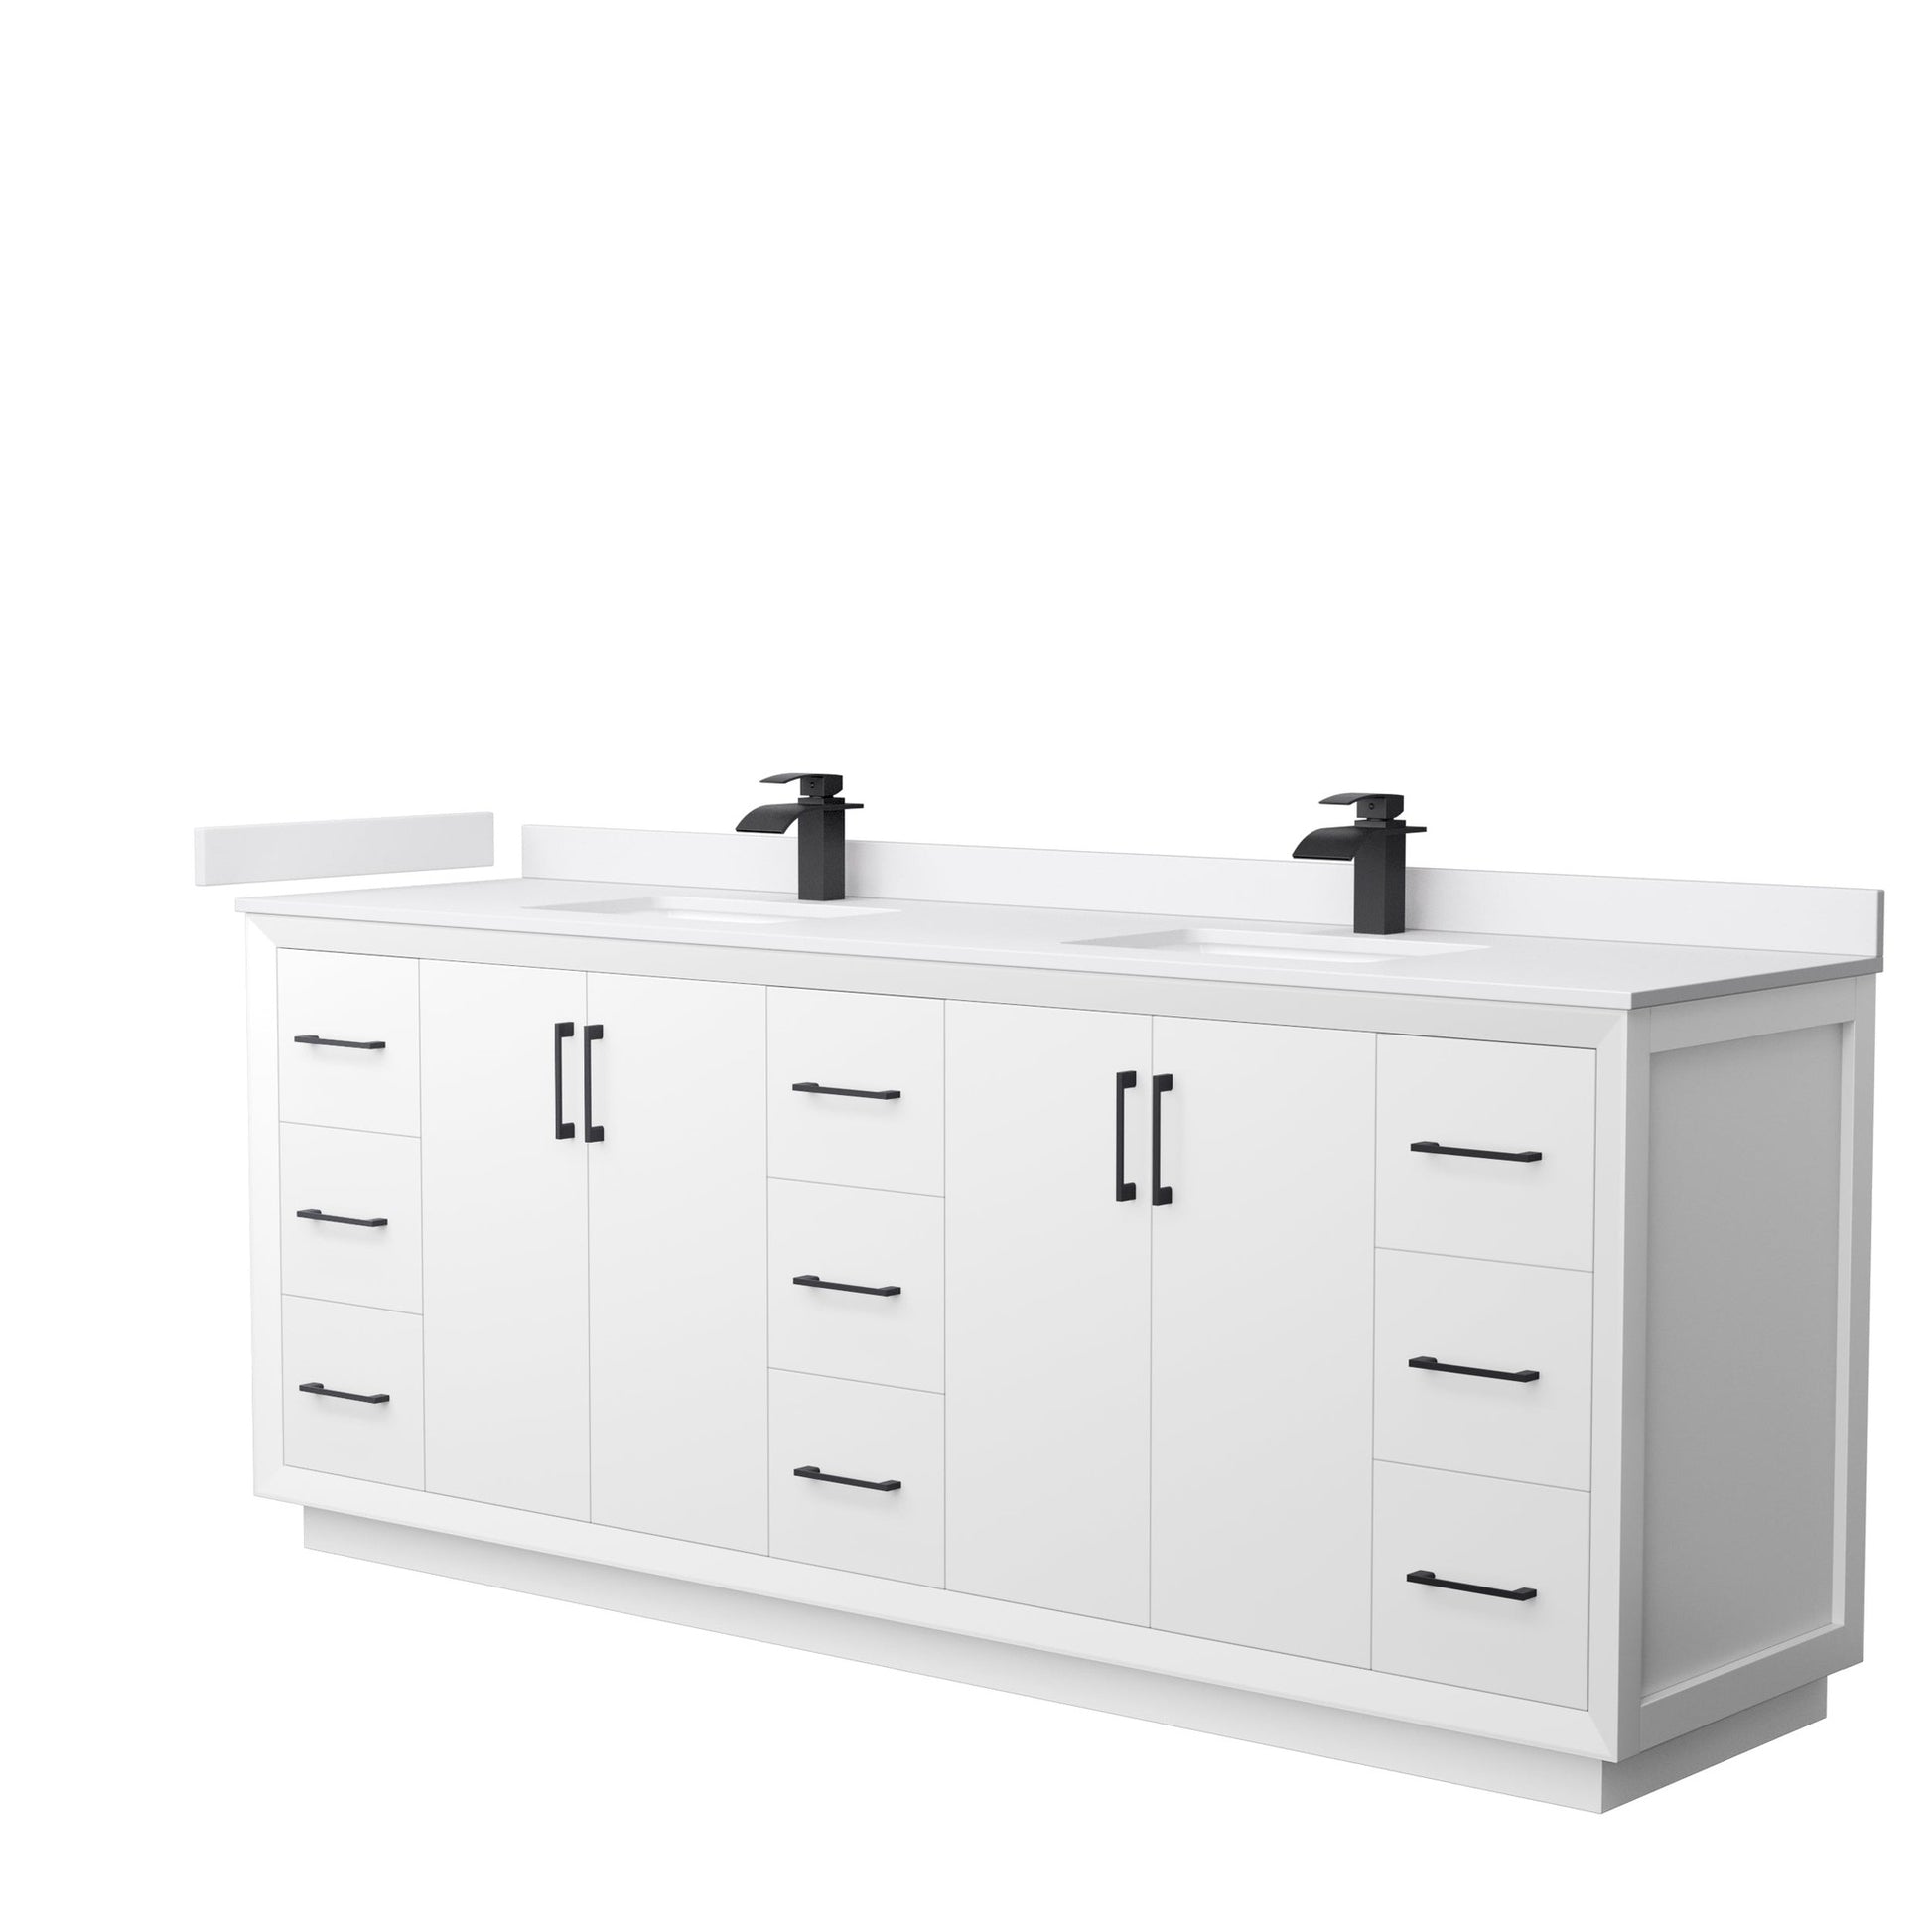 Wyndham Collection Strada 84" Double Bathroom Vanity in White, White Cultured Marble Countertop, Undermount Square Sink, Matte Black Trim